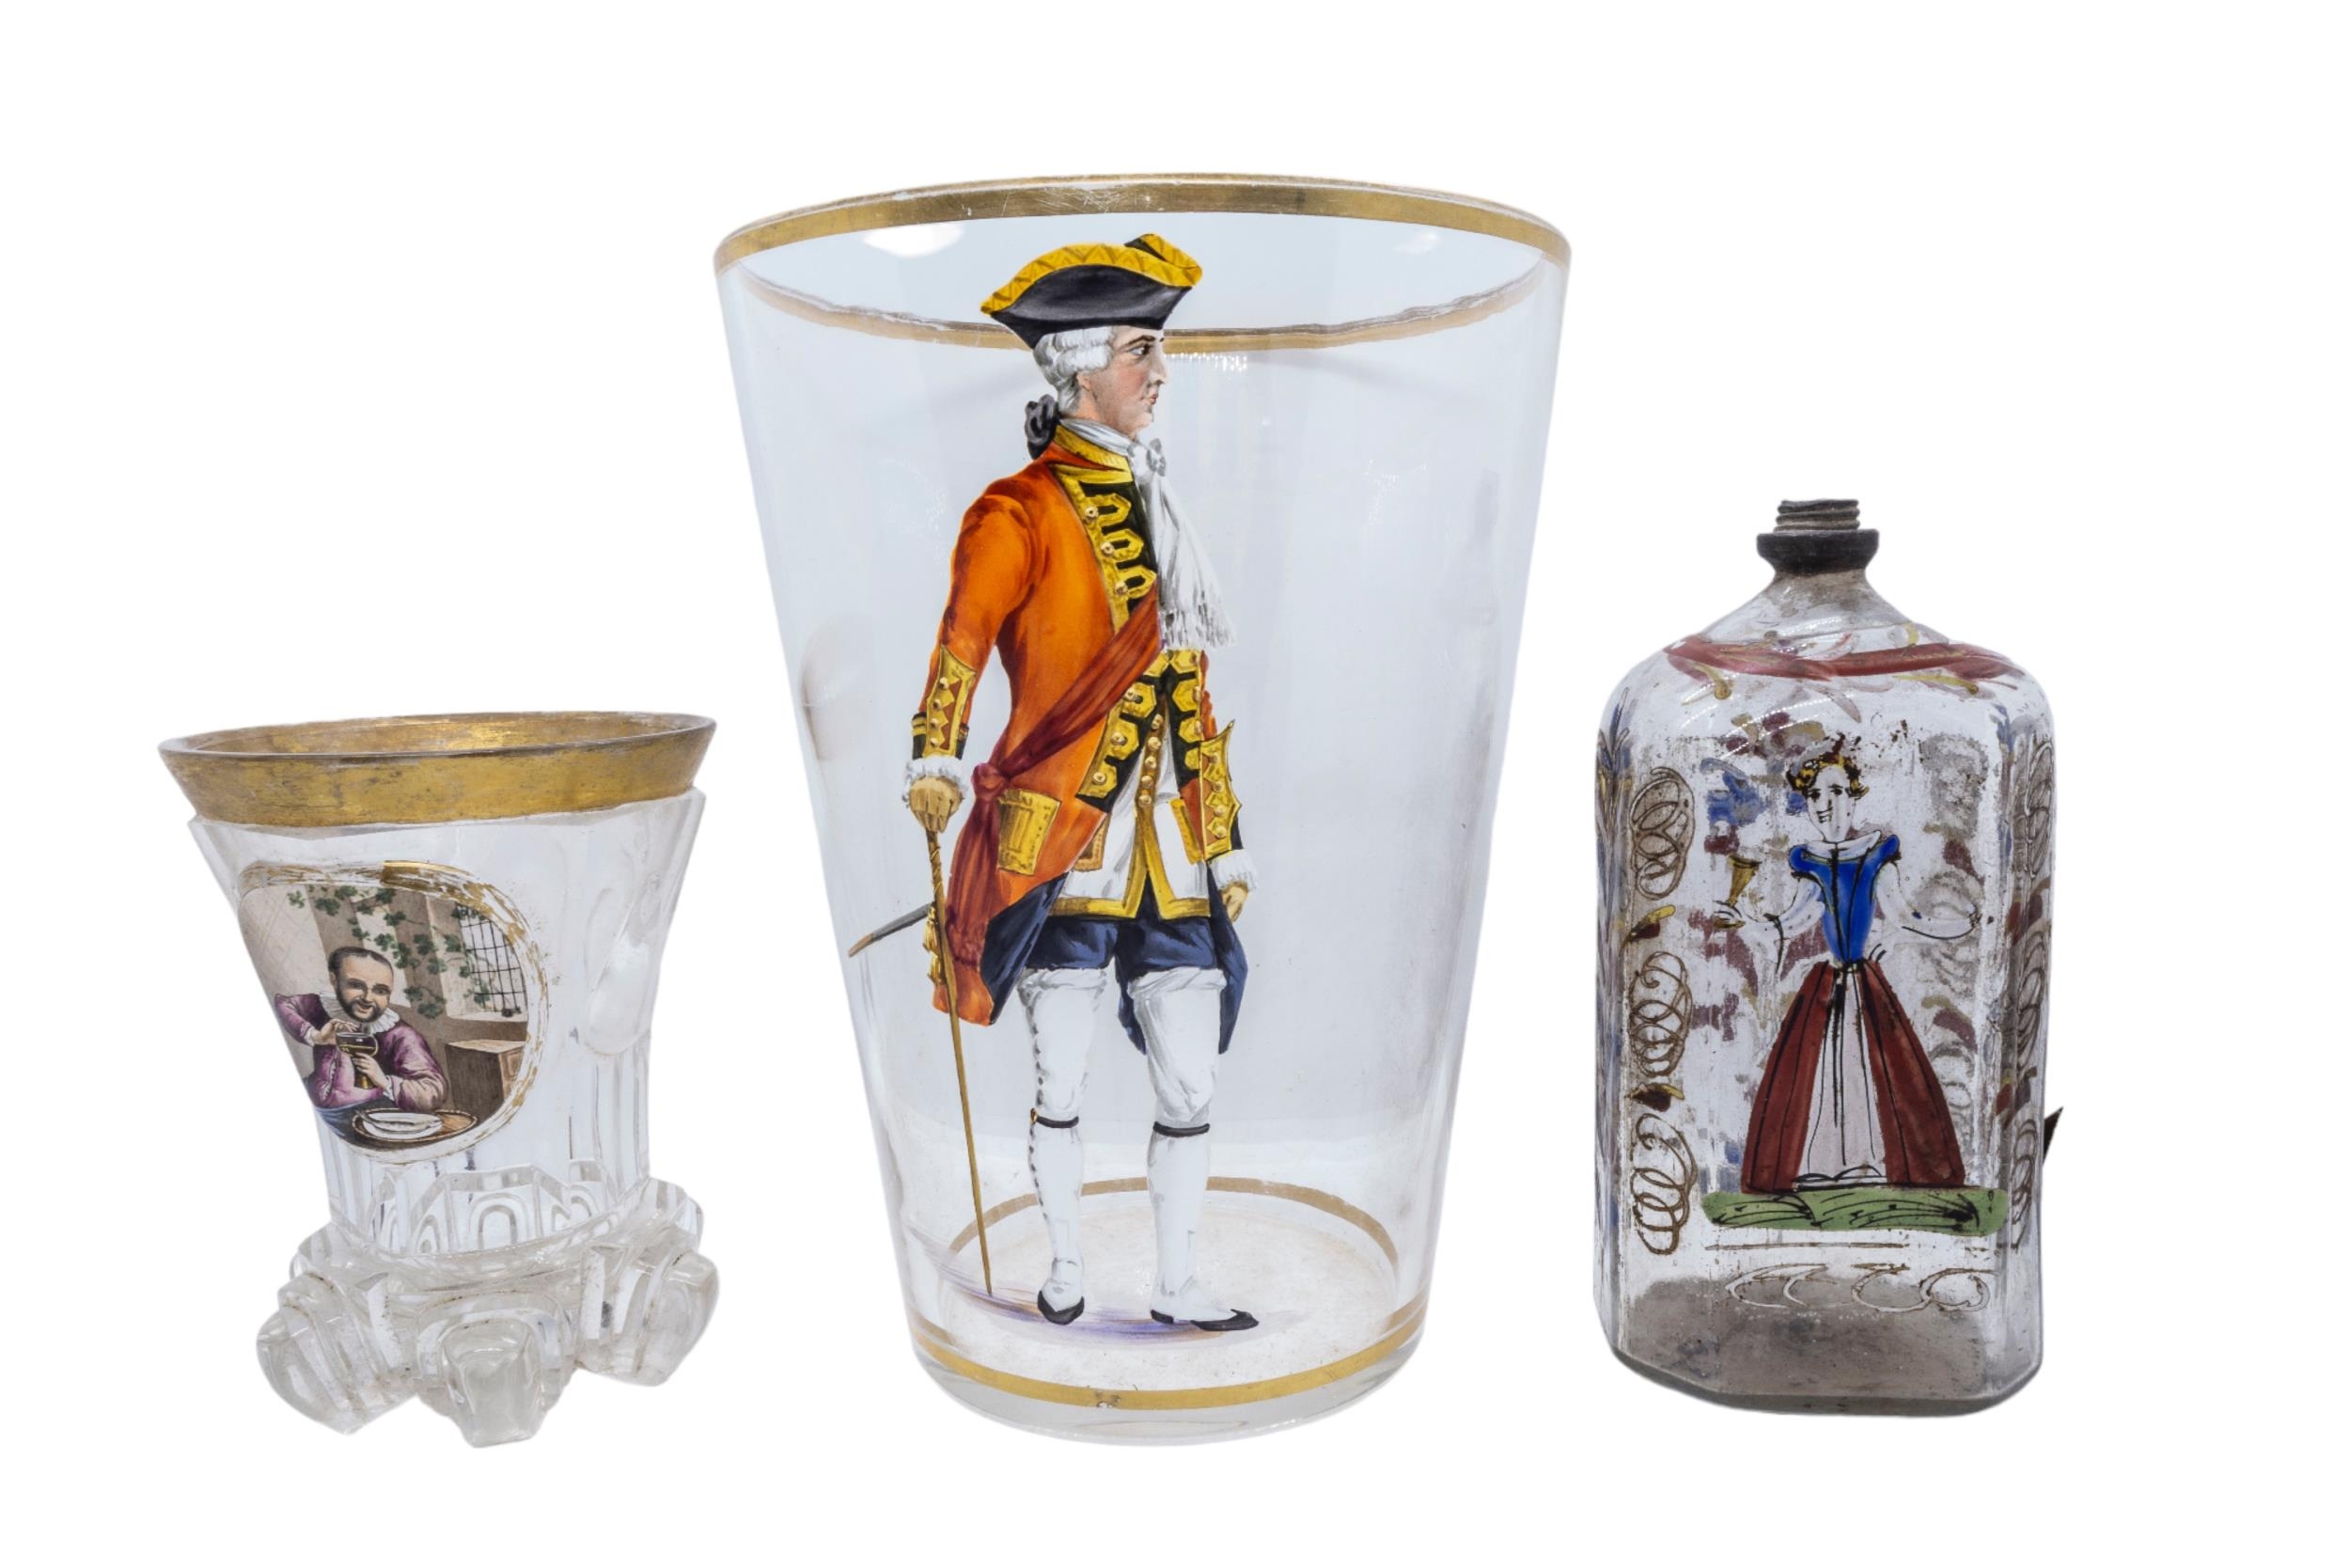 A GROUP OF CONTINENTAL GLASS WARE, PREDOMINANTLY 19TH CENTURY, the lot includes a spar glass with - Image 3 of 4